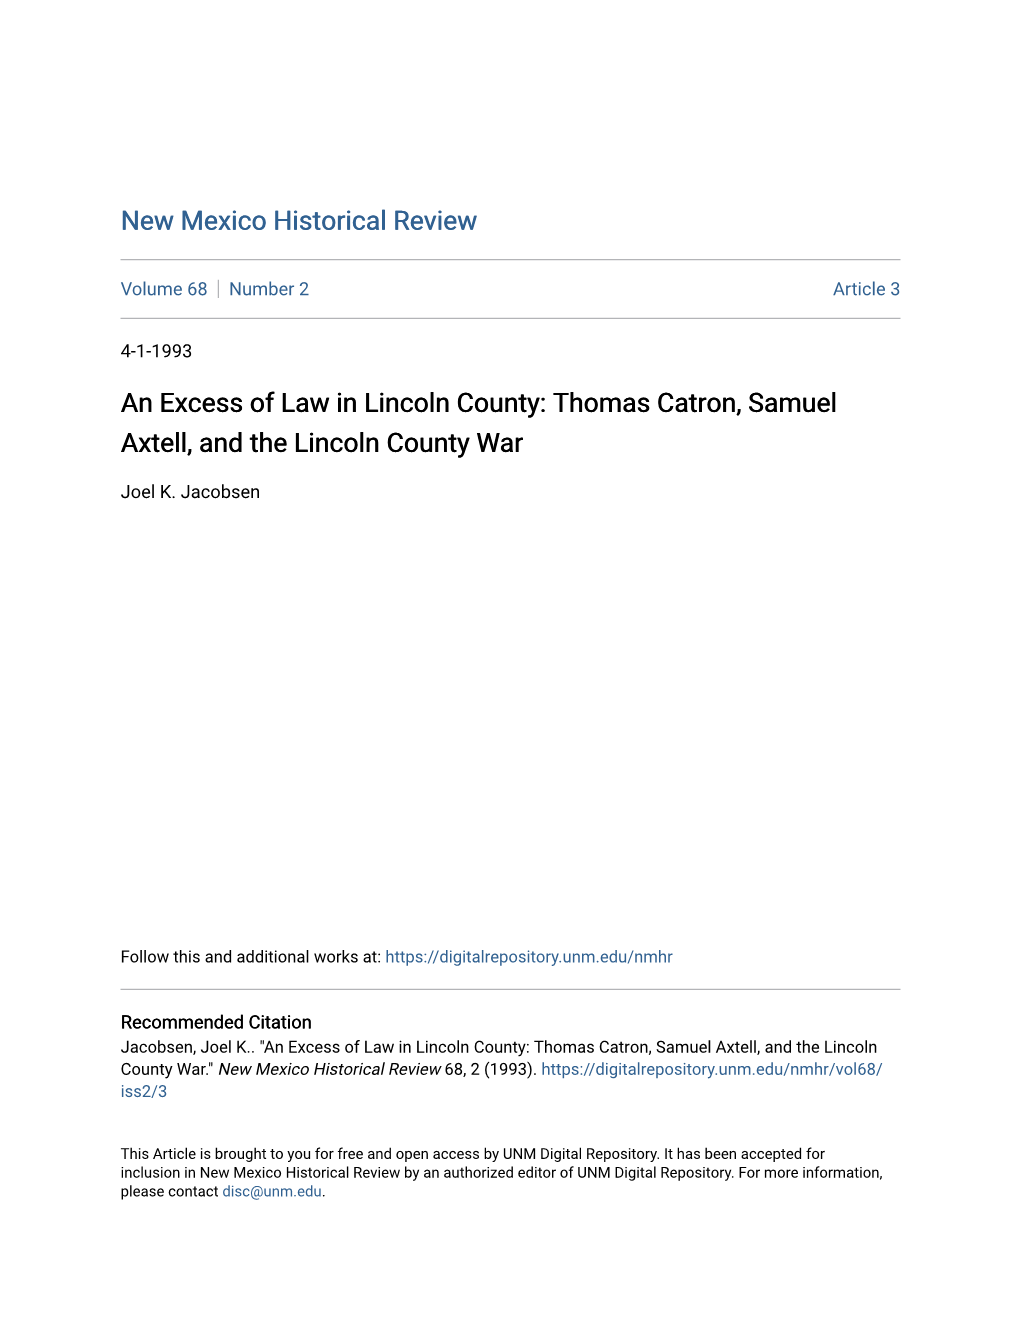 Thomas Catron, Samuel Axtell, and the Lincoln County War